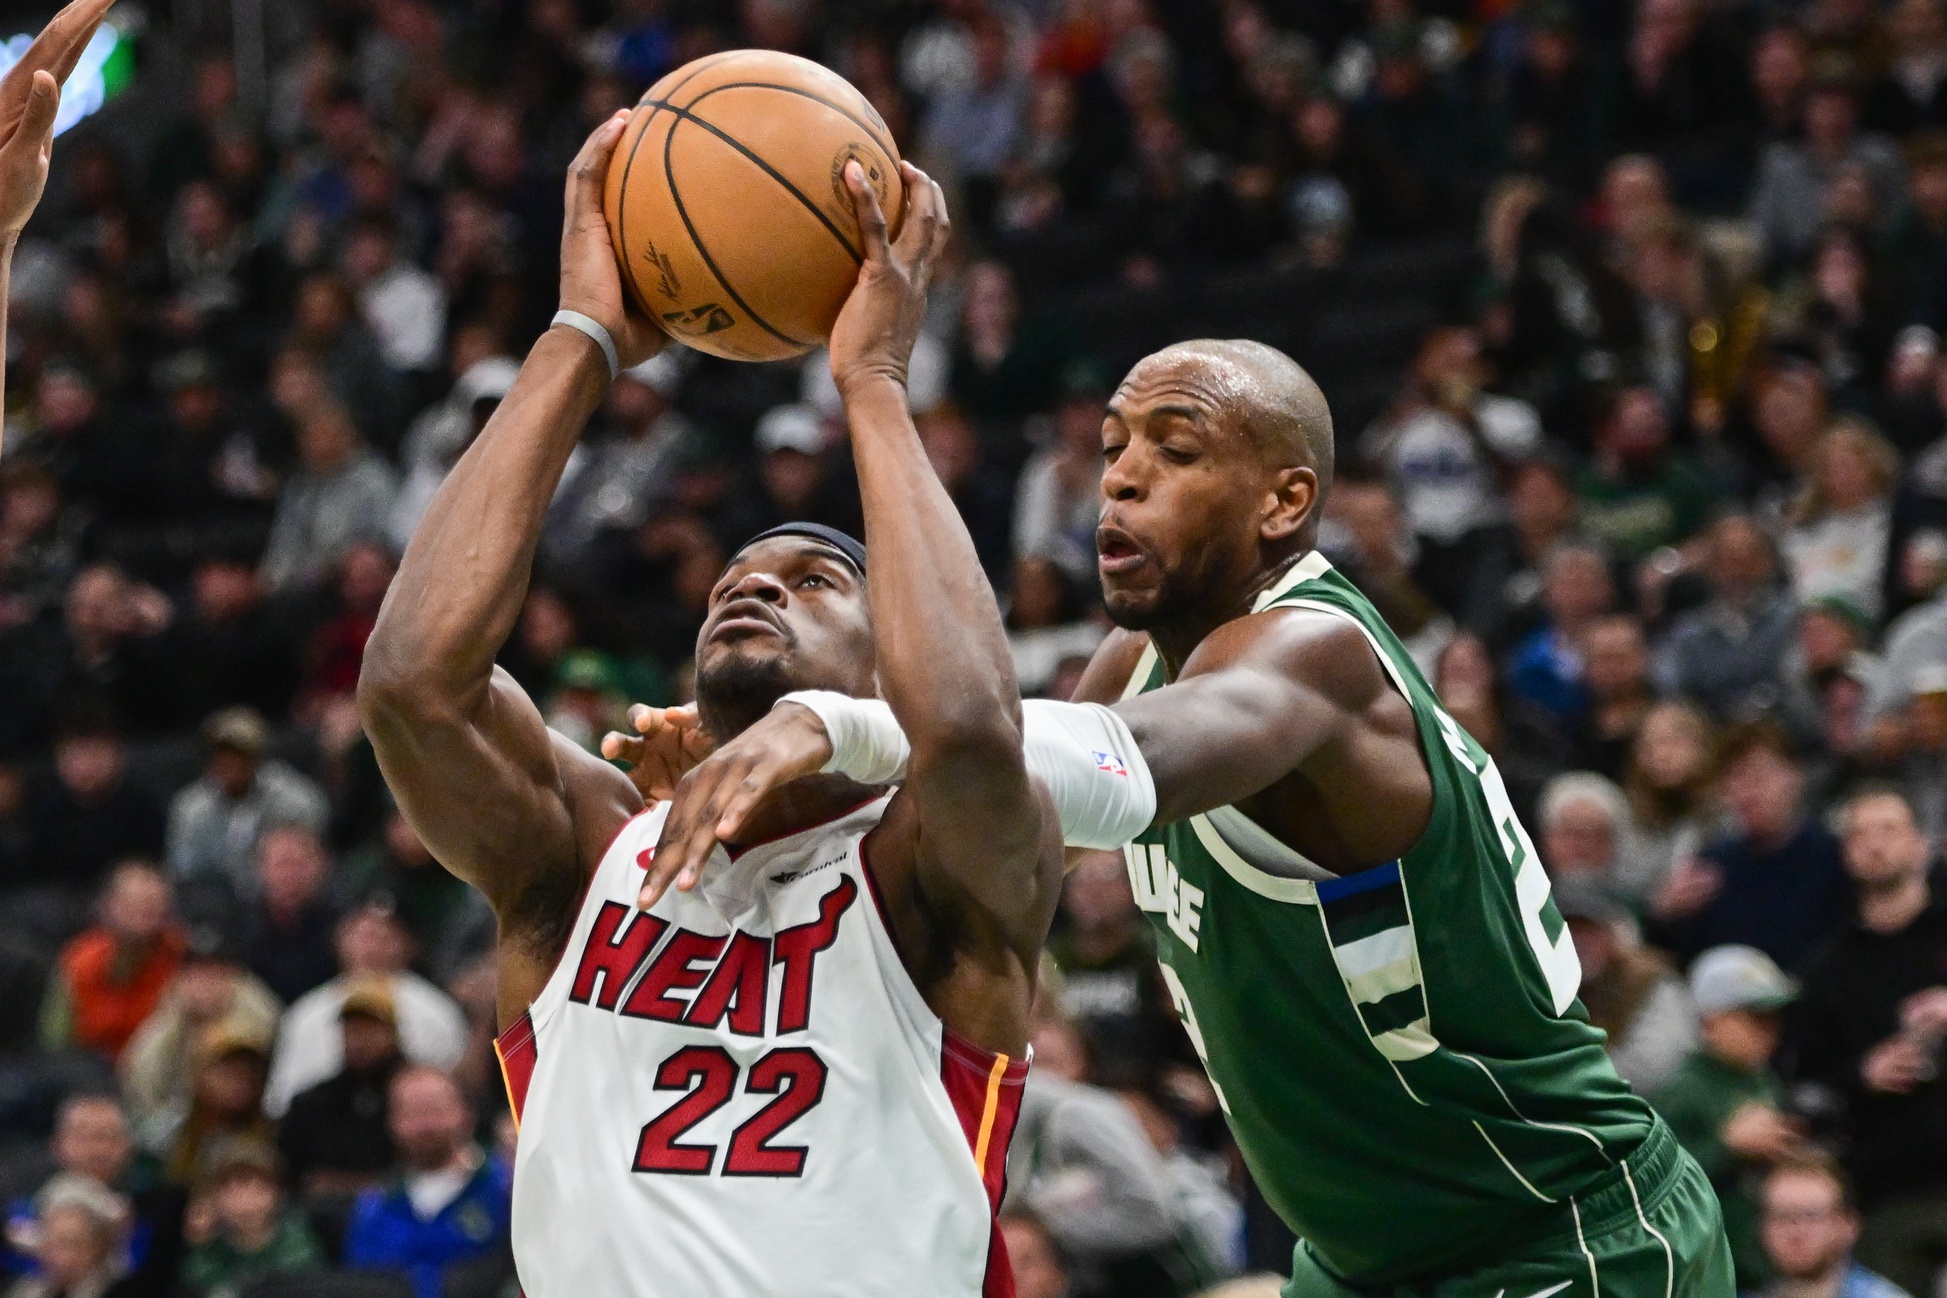 Oct 30, 2023; Milwaukee, Wisconsin, USA; Miami Heat center Jimmy Butler (22) is fouled by Milwaukee Bucks center Khris Middleton (22) in the fourth quarter at Fiserv Forum. Mandatory Credit: Benny Sieu-USA TODAY Sports